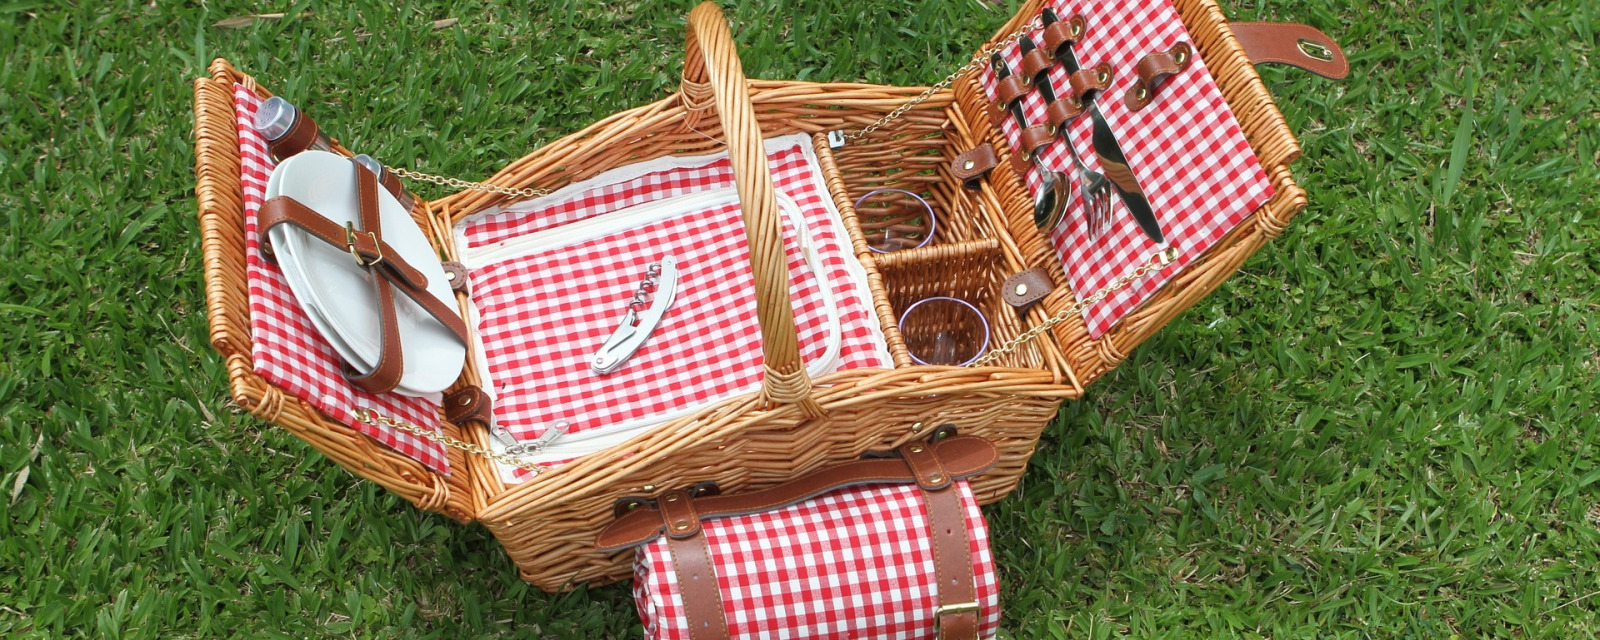 Group of Seven Picnic Lunches